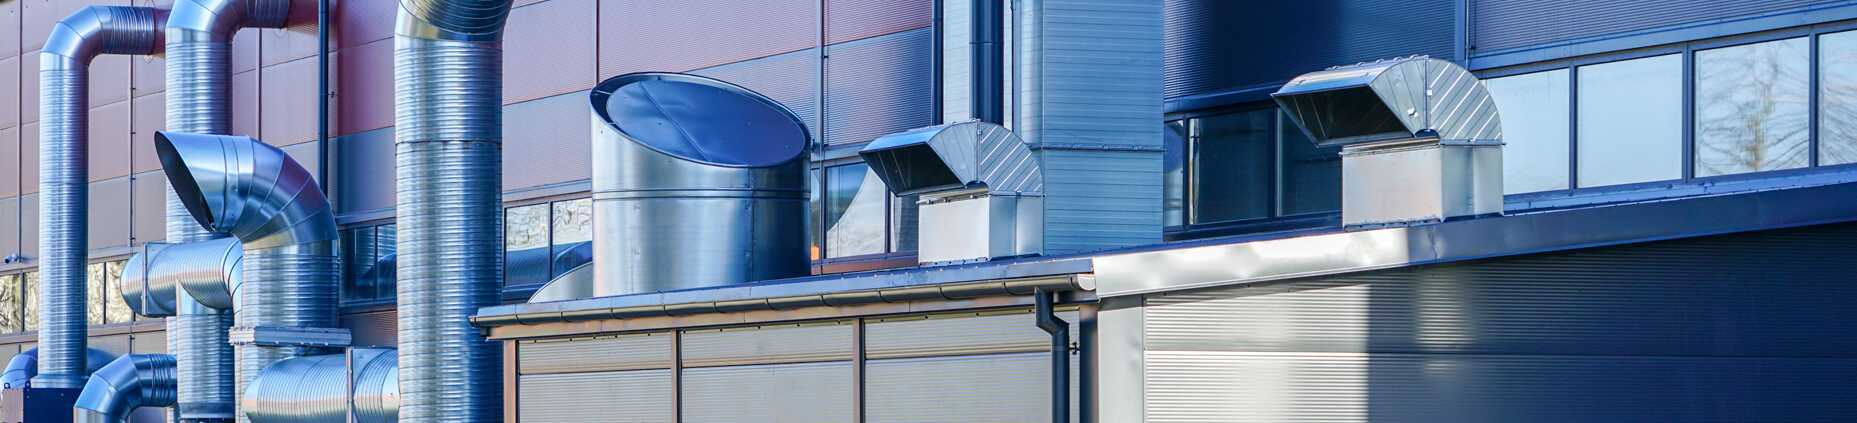 New modern factory heating and ventilation system with stainless steel pipes and chimneys